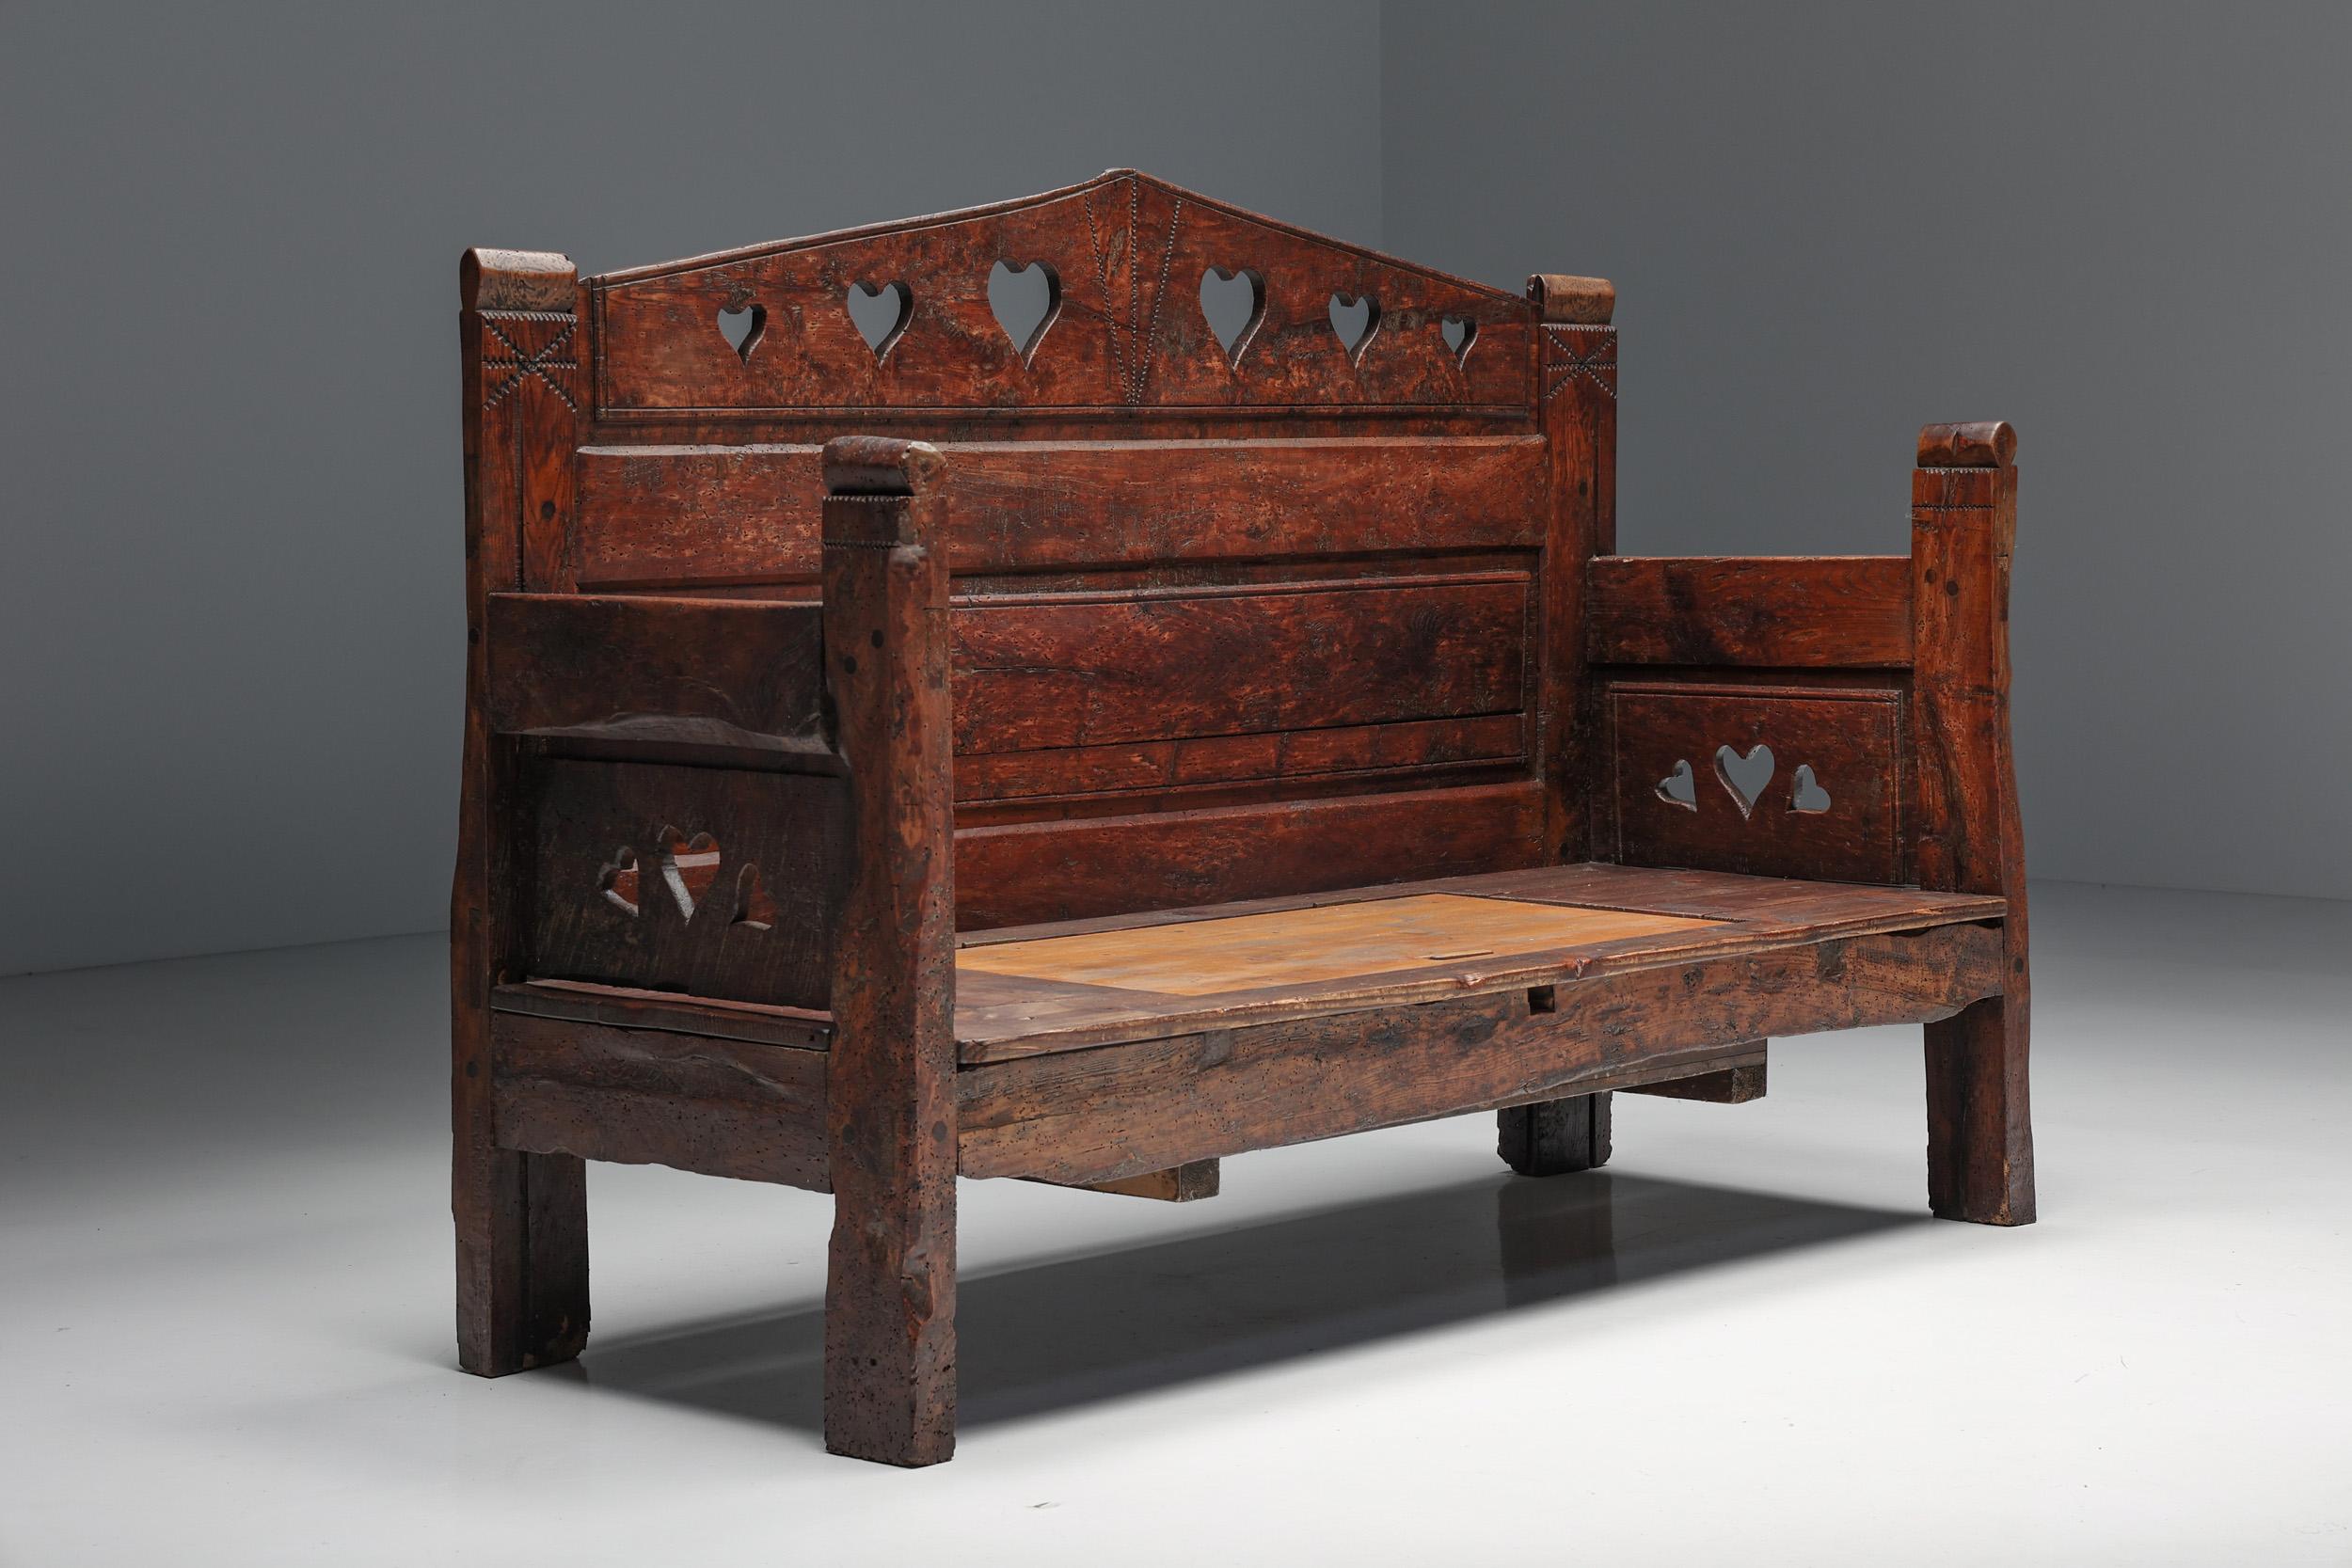 Transport yourself to the 19th century with this exquisite rustic three-seater bench, hailing from either Haute-Savoie, Breton, or Auvergnat regions. The rich patina adorning the monoxylite wood is a testament to the storied history of this